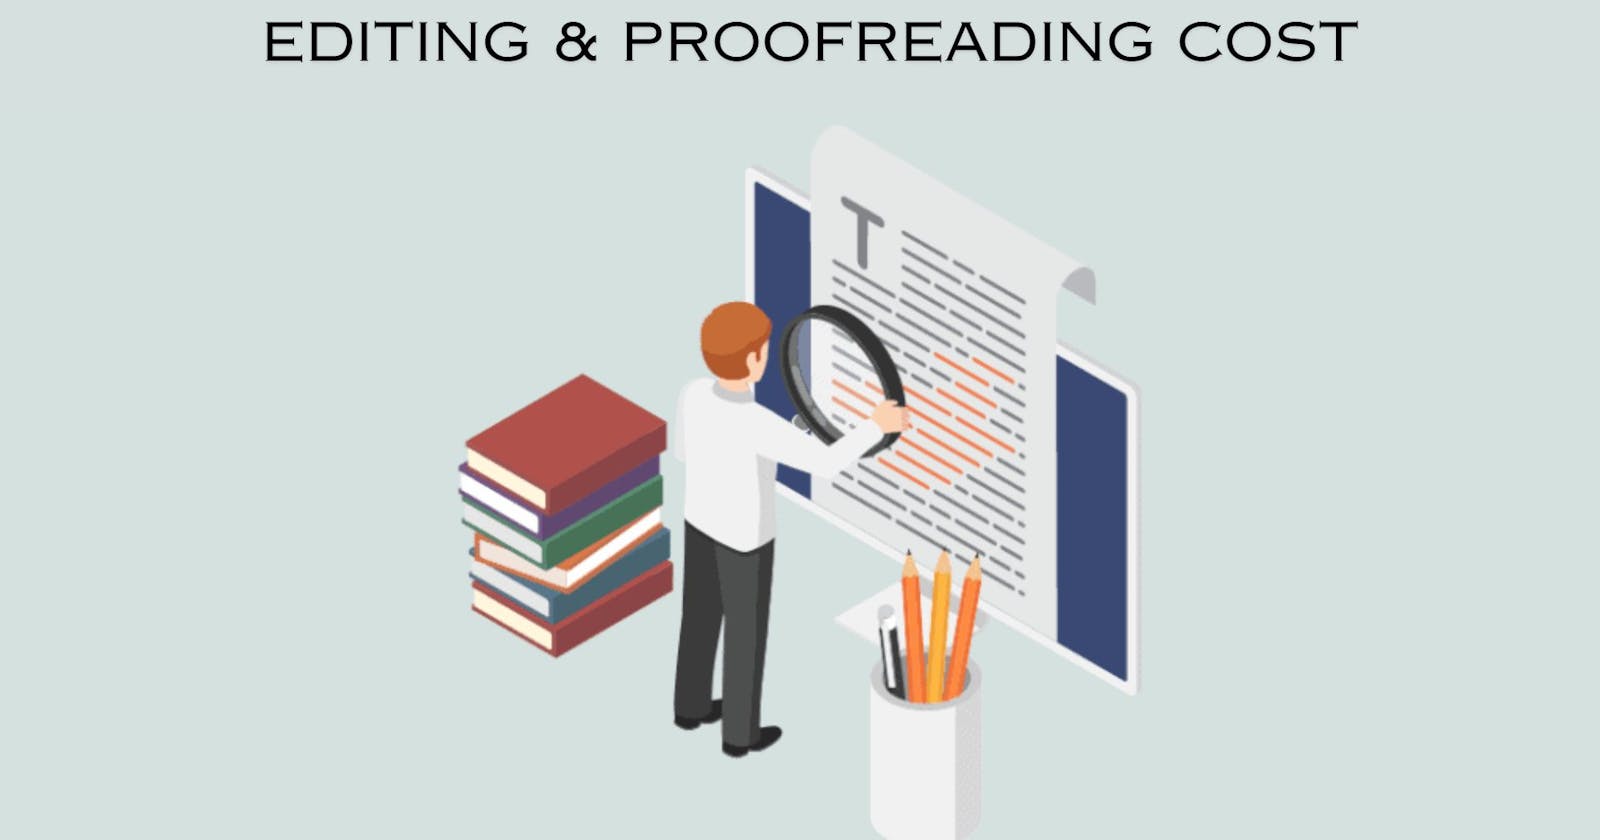 How Much Does Business Editing & Proofreading Cost?